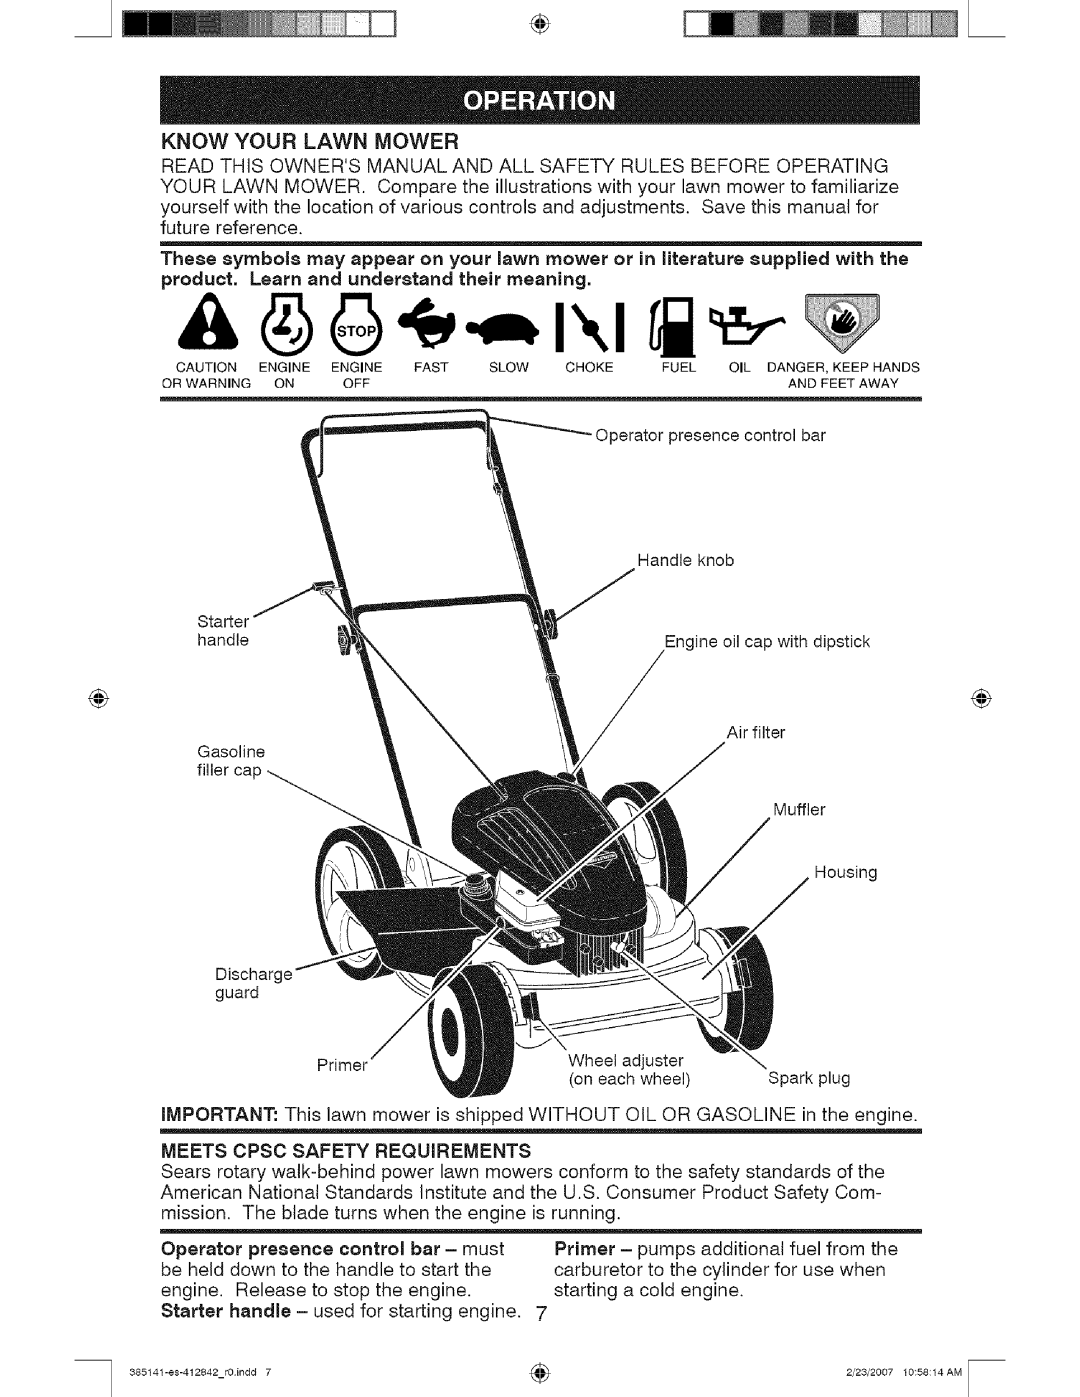 Craftsman 141, 385 owner manual Know Your Lawn Mower 